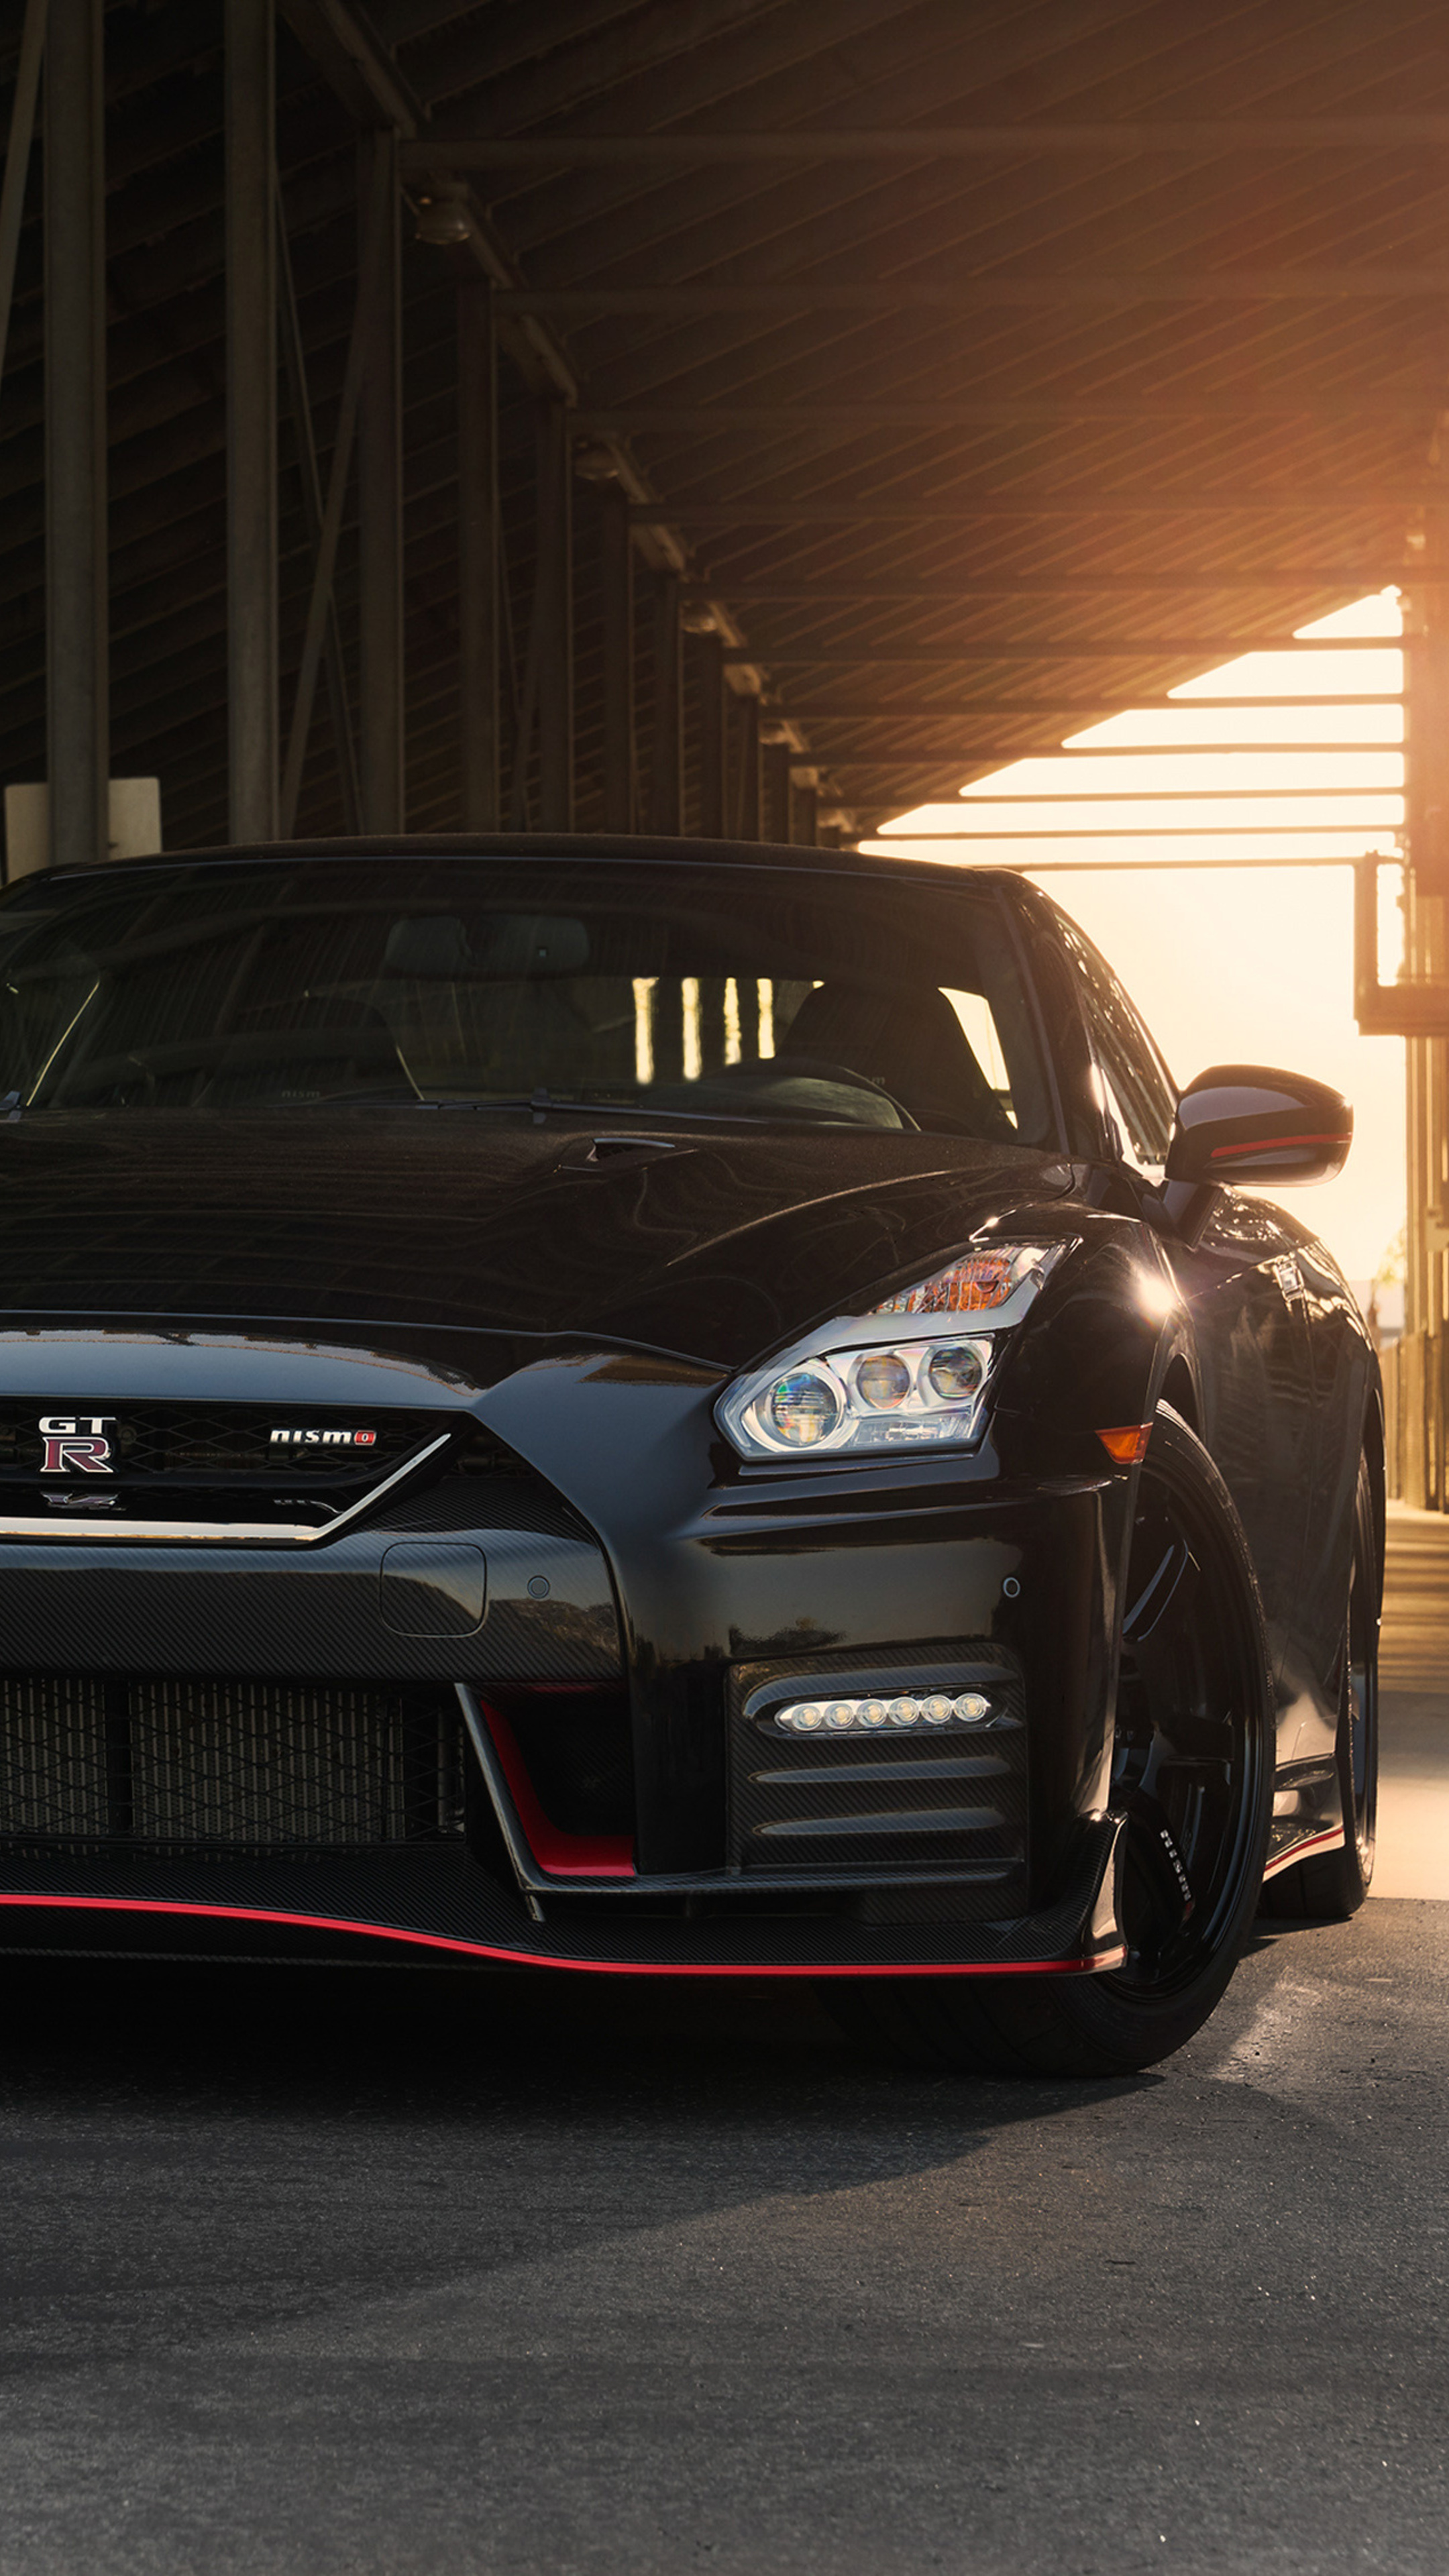 Nissan GT-R, 2018 NISMO edition, Sony Xperia exclusive, Stunning 4K visuals, 2160x3840 4K Phone